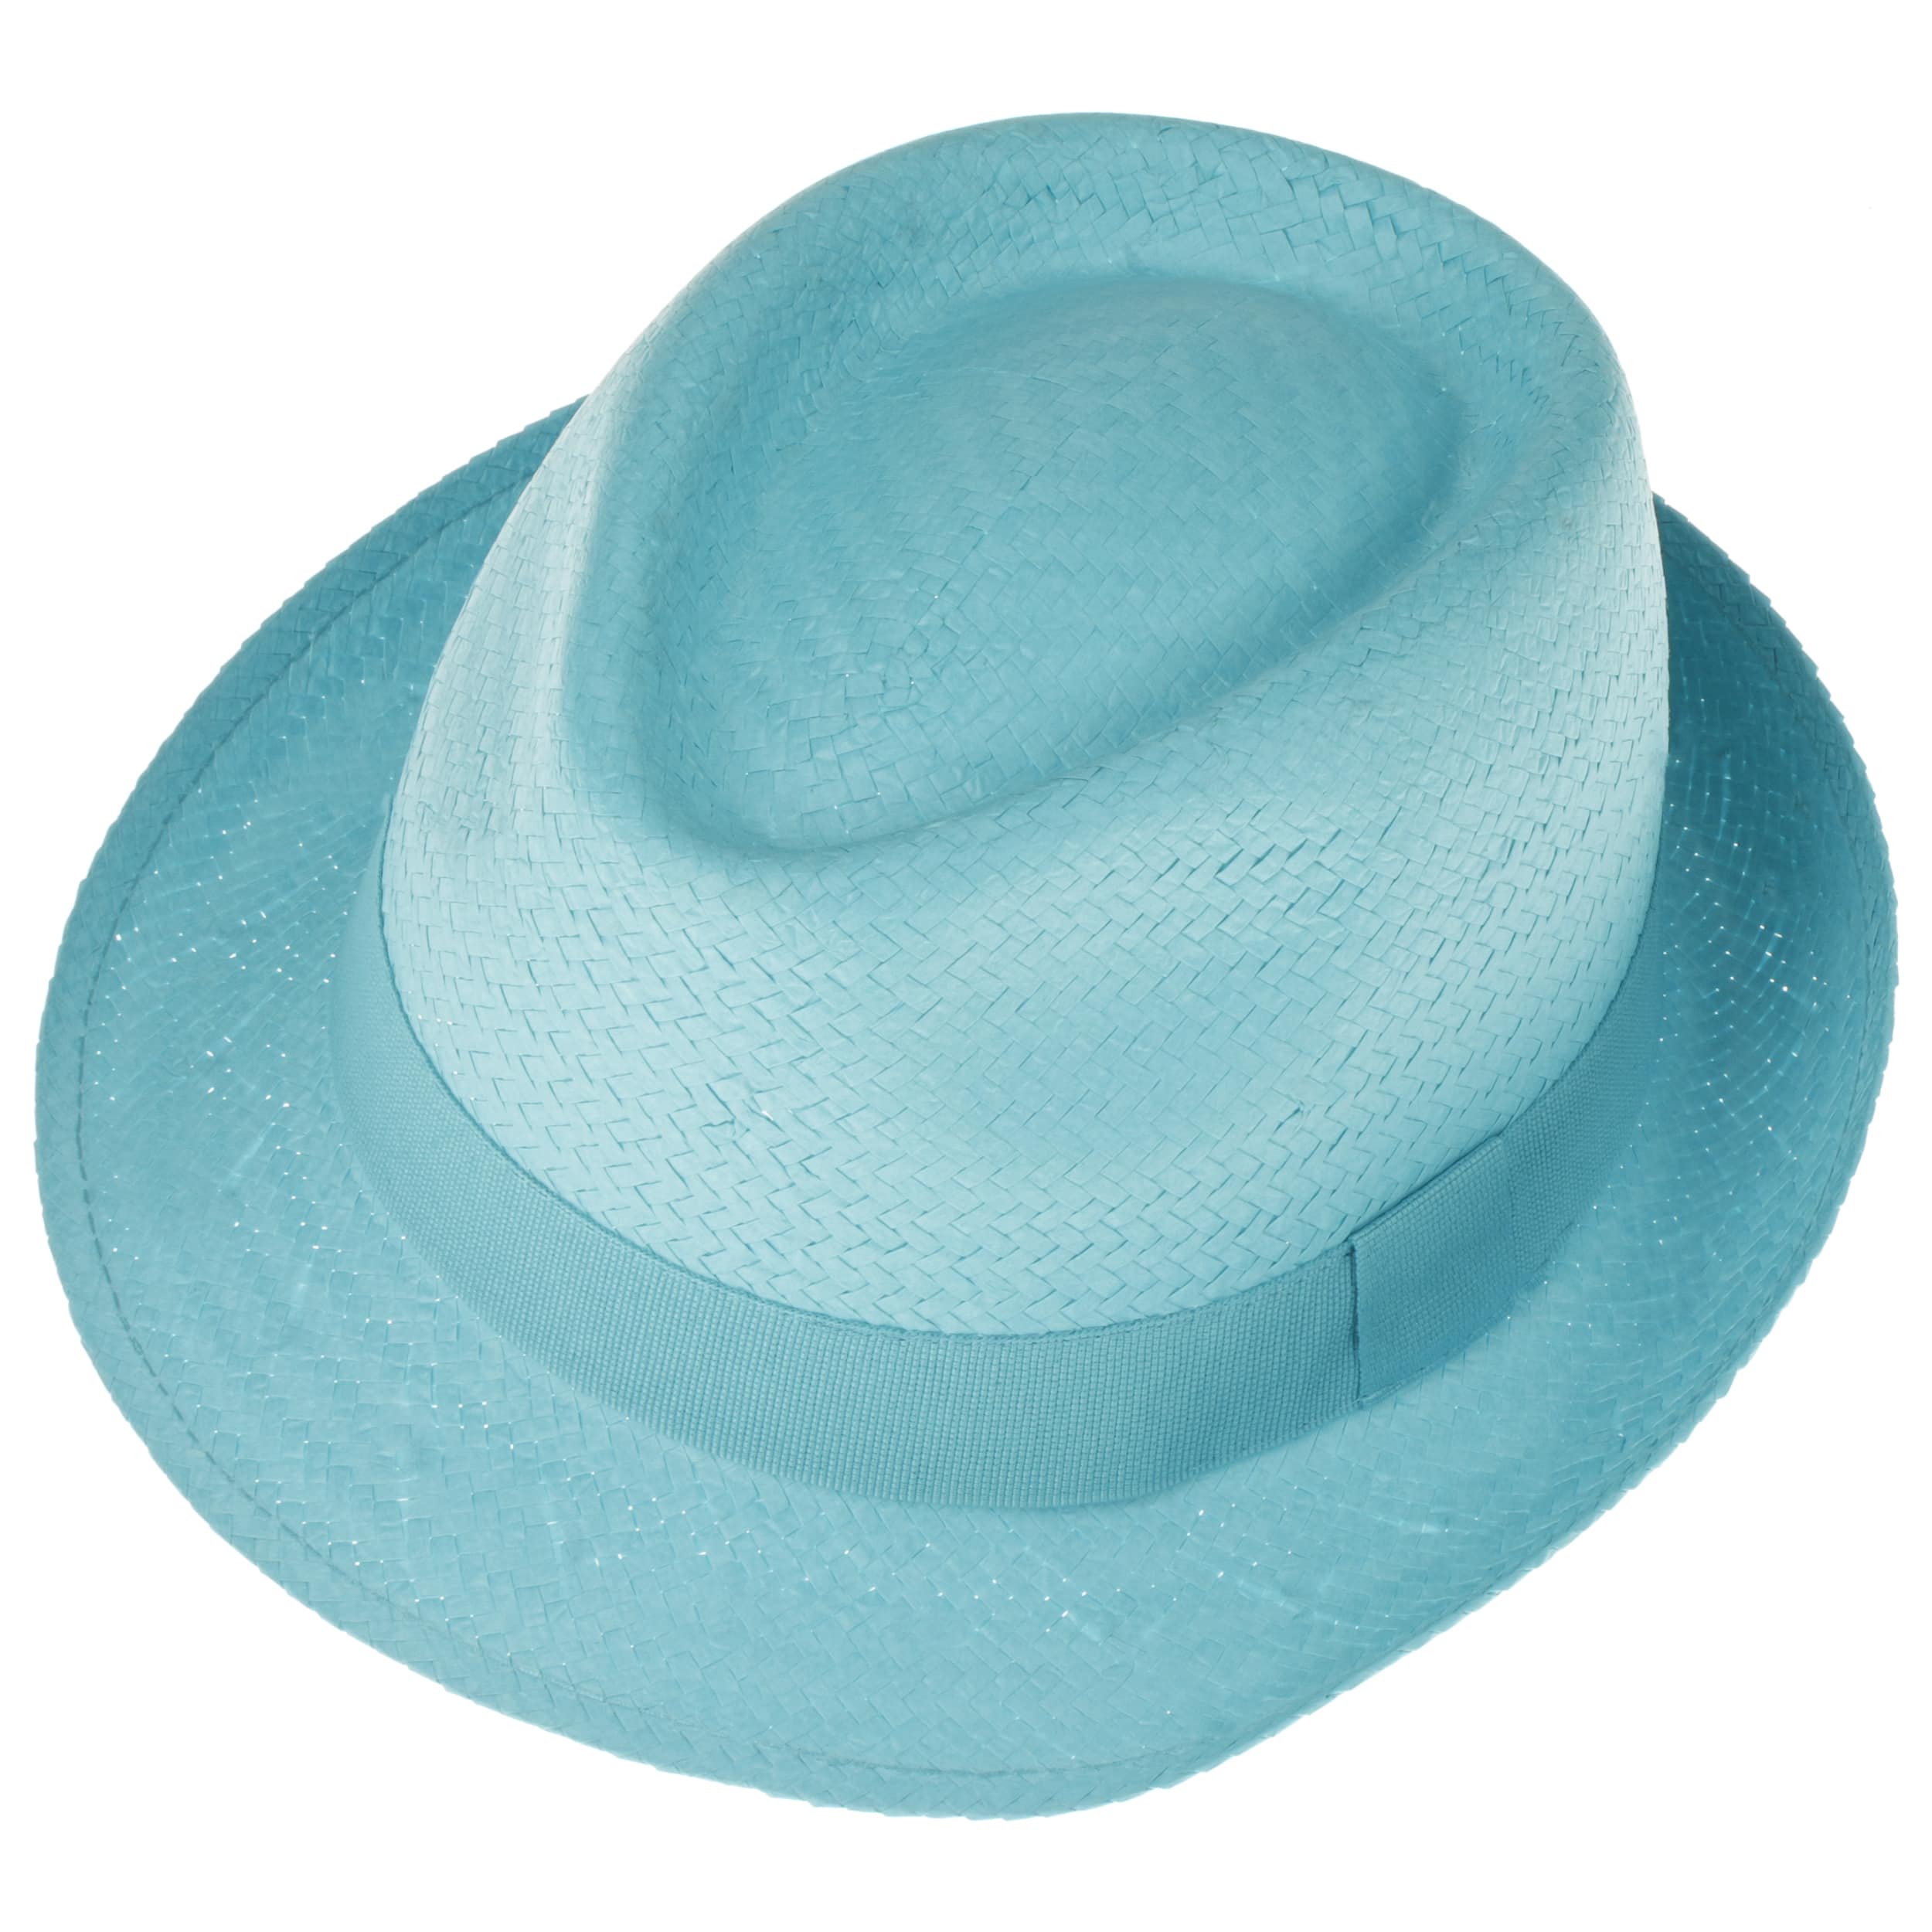 55 cm Sun Hat Made in Italy Straw Hat in Sizes 53 cm Summer Hat Made of 100% Paper Straw 57 cm and 59 cm Men and Children |Spring/Summer Malaga Straw Trilby for Women 